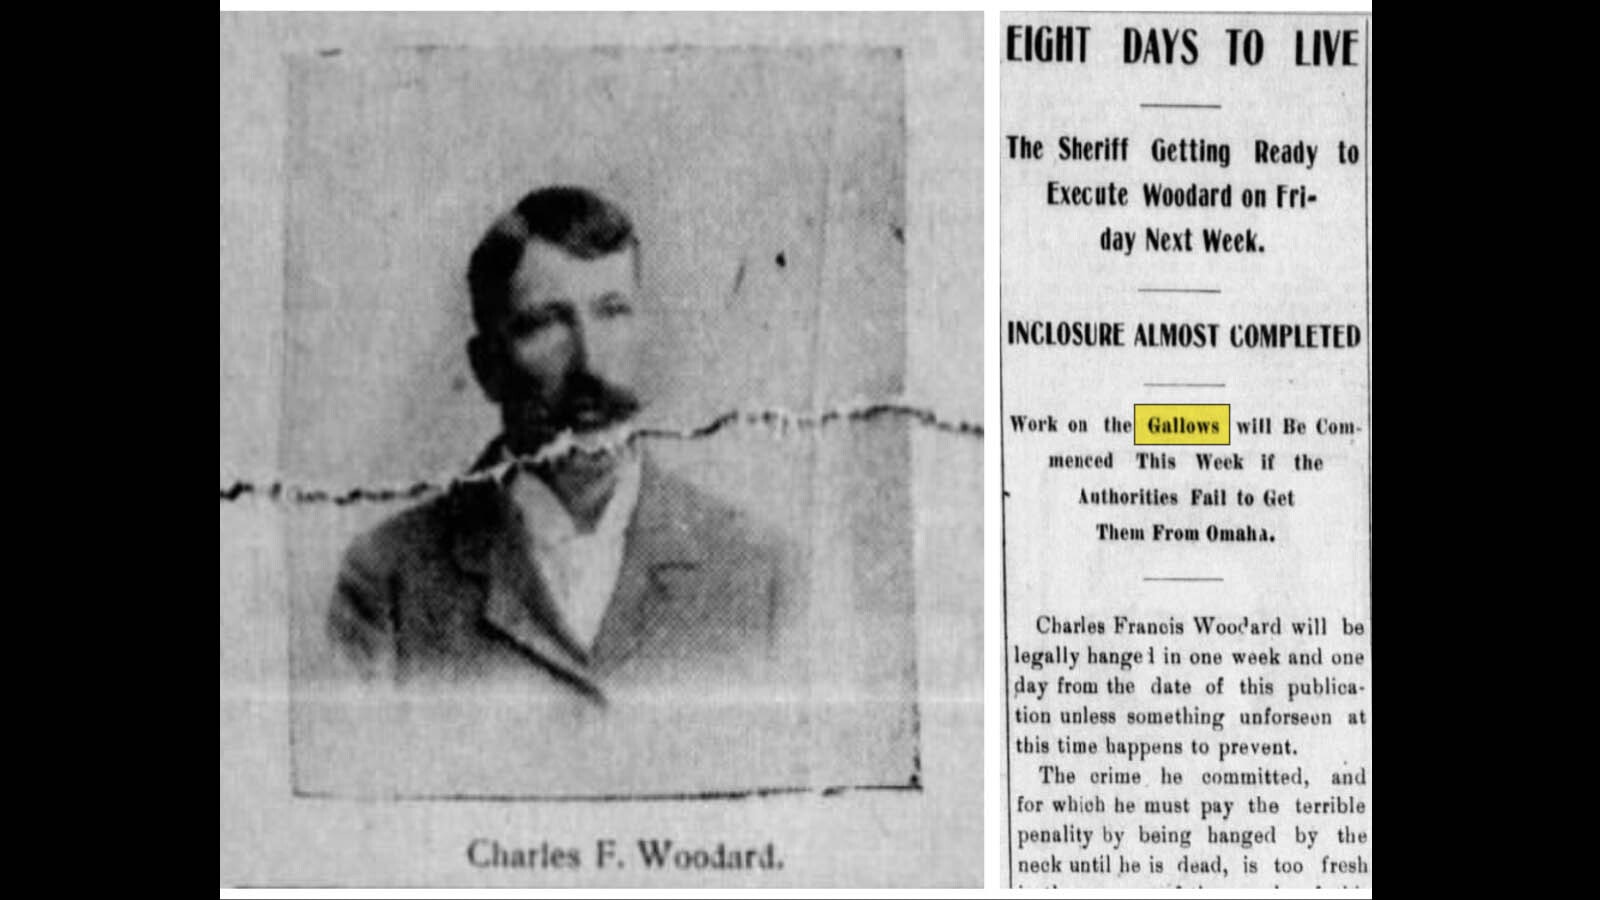 Left, a photo of Charles Woodard as depicted in the Natrona County Tribune. Right, news article in the Natrona County Tribune the week before the vigilante hanging announces that the gallows are almost complete.